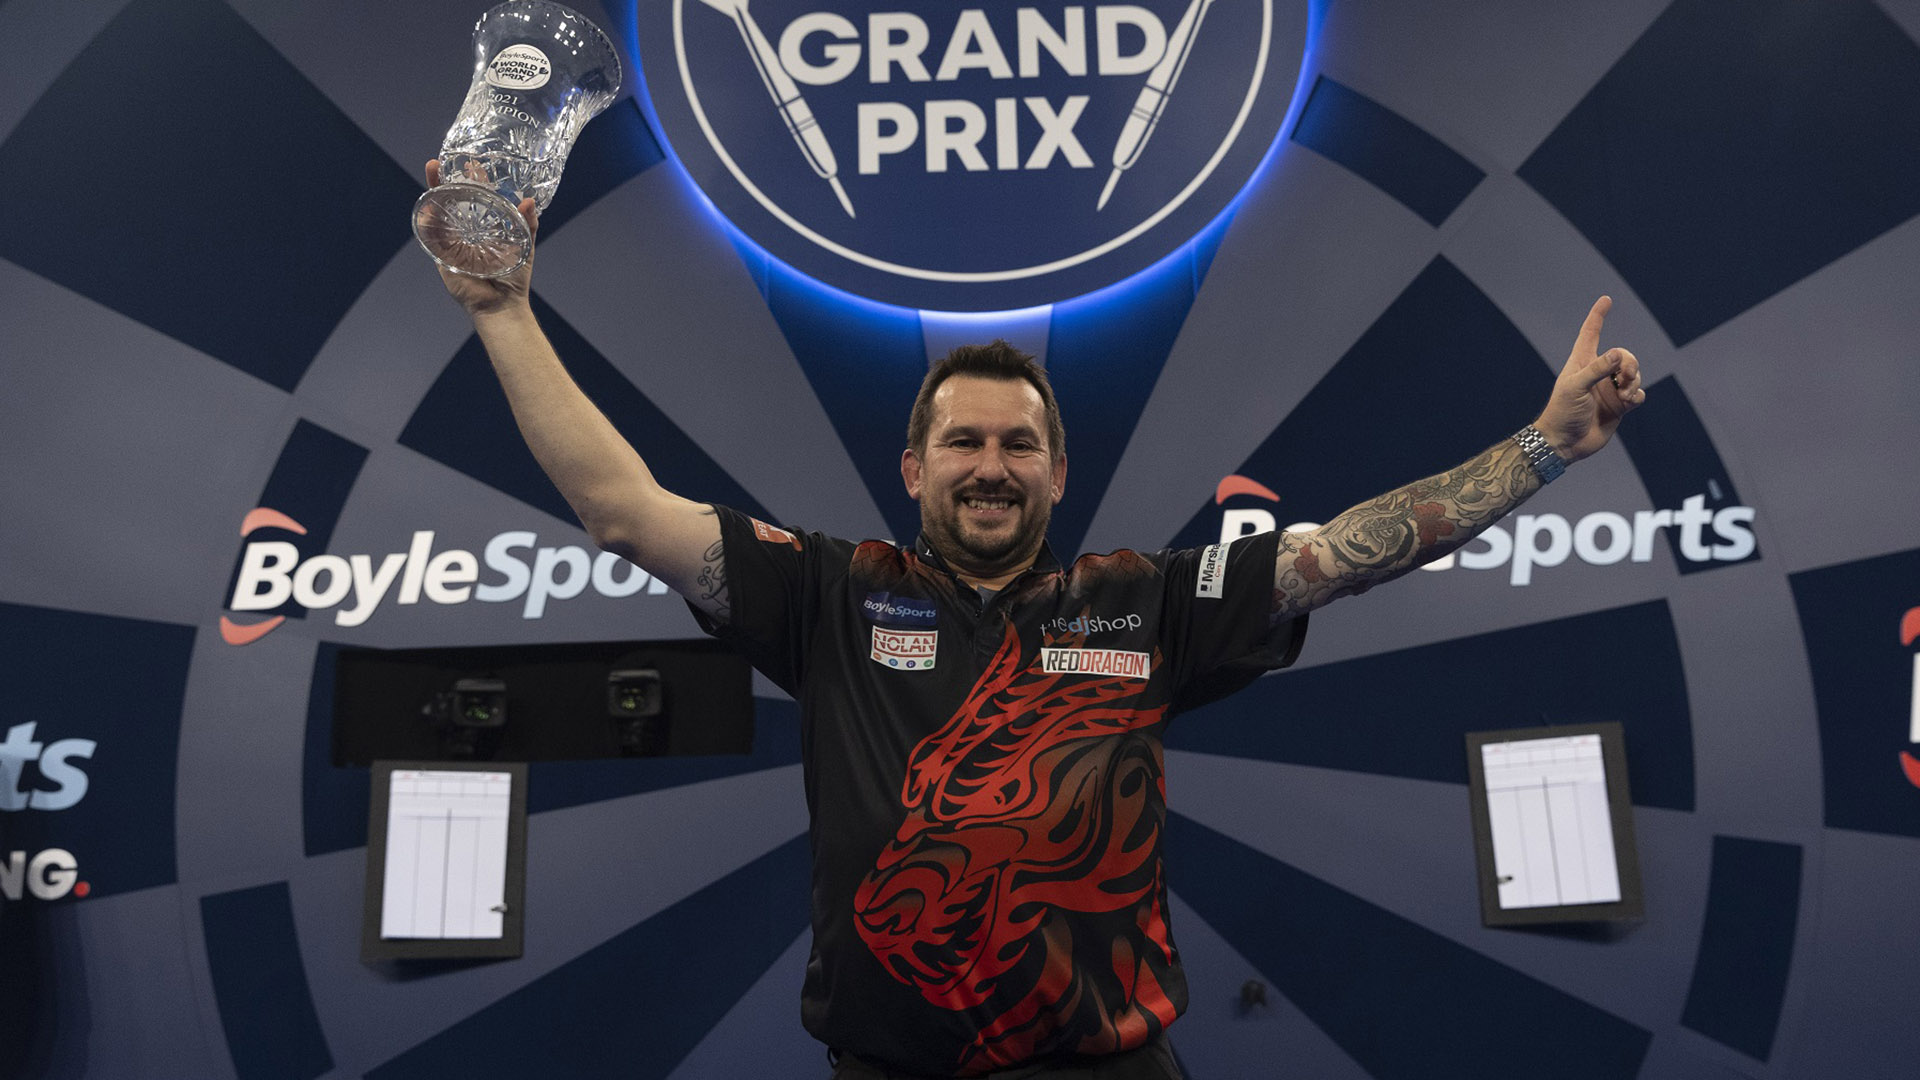 World Grand Prix darts 2021 Draw, schedule, betting odds, results and live Sky Sports TV coverage details